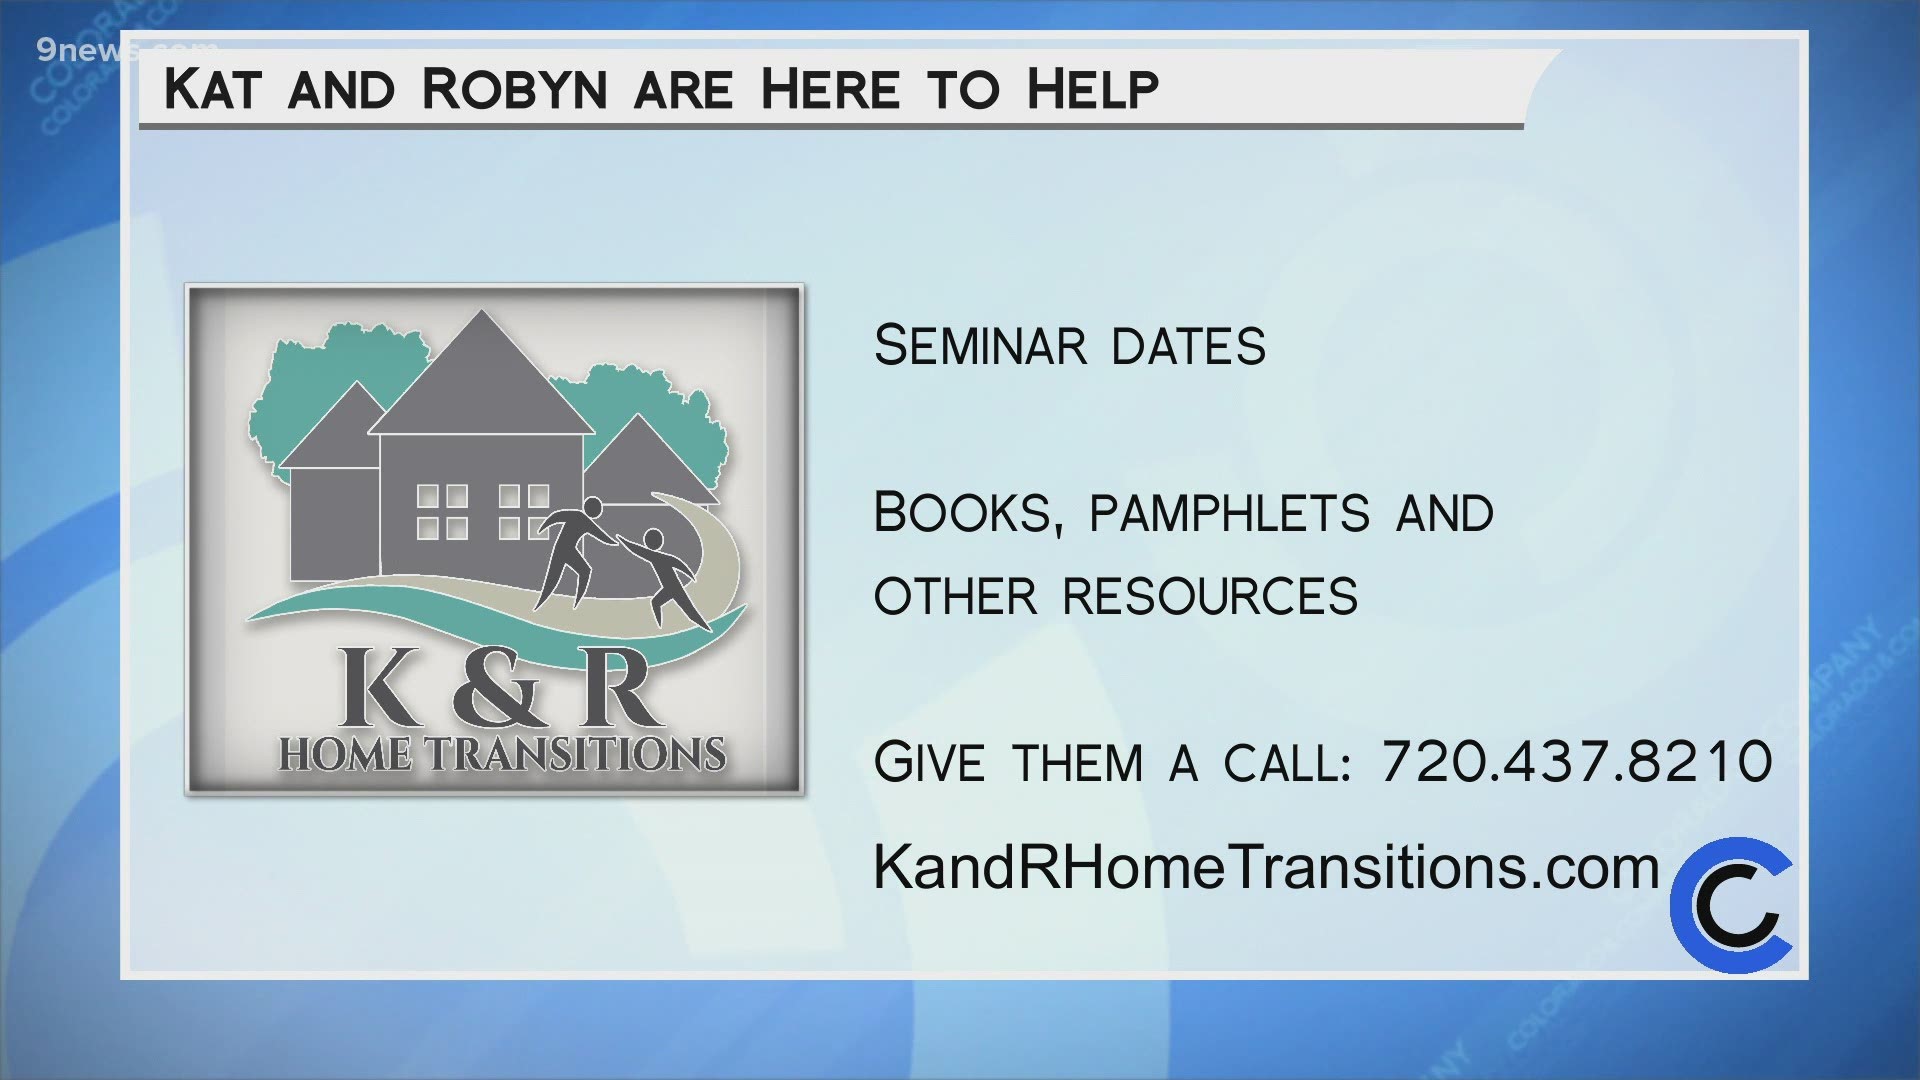 K&R has resources and seminars available to learn more about making a transition. Learn more by calling 720.437.8210 or visit KandRHomeTransitions.com.